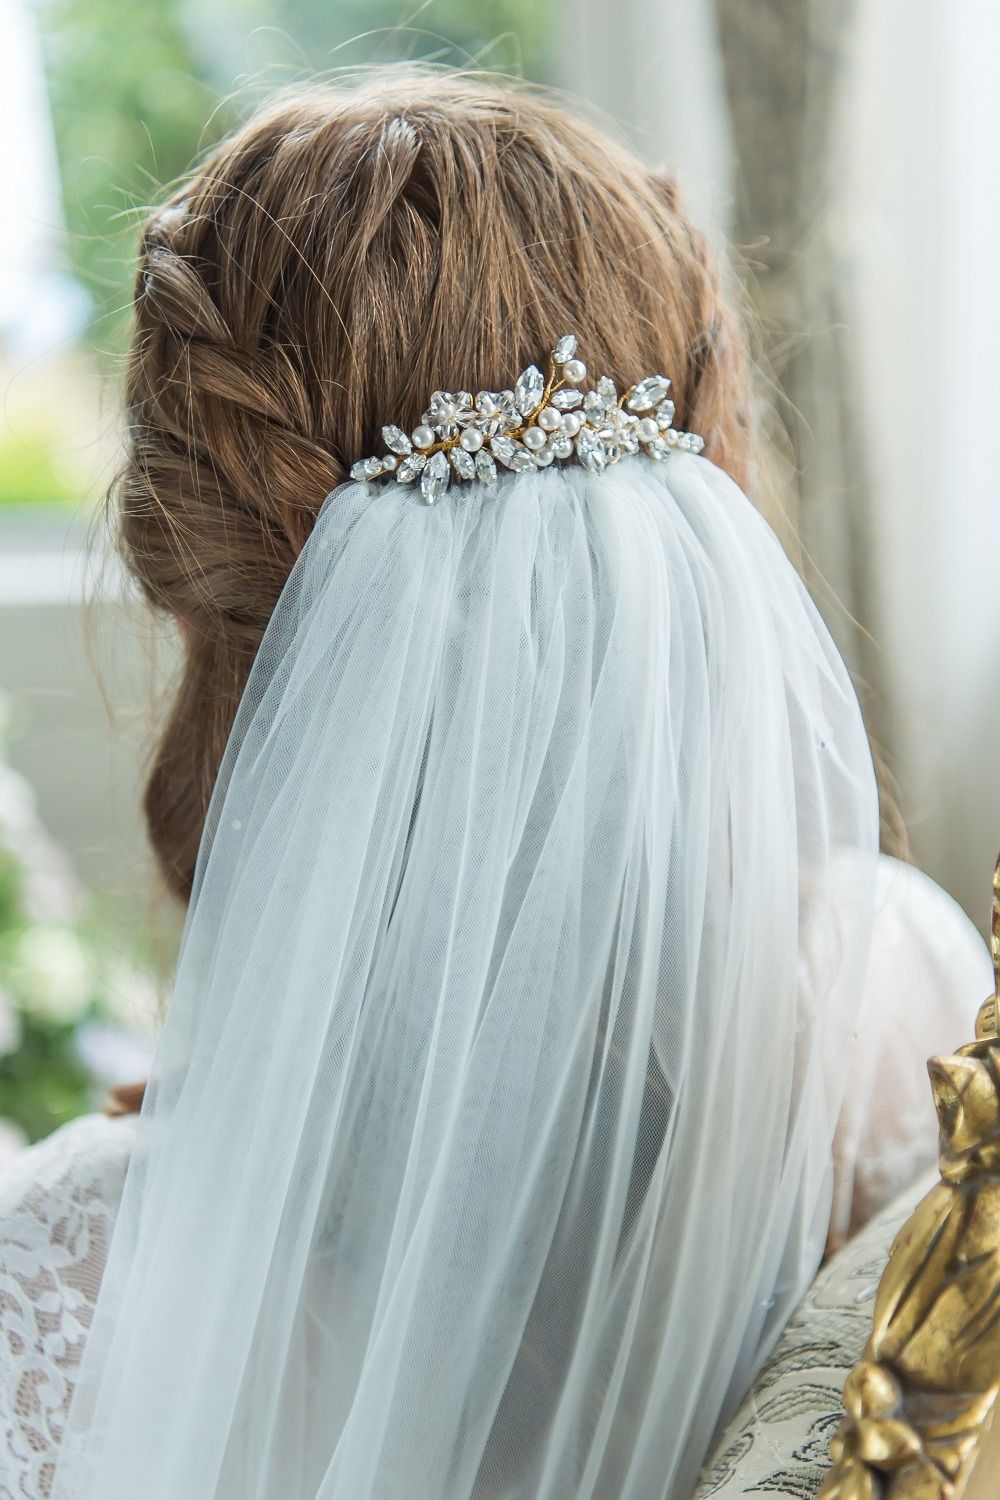 Gorgeous Bridal Headpieces For Half Up Half Down Wedding Hairstyle